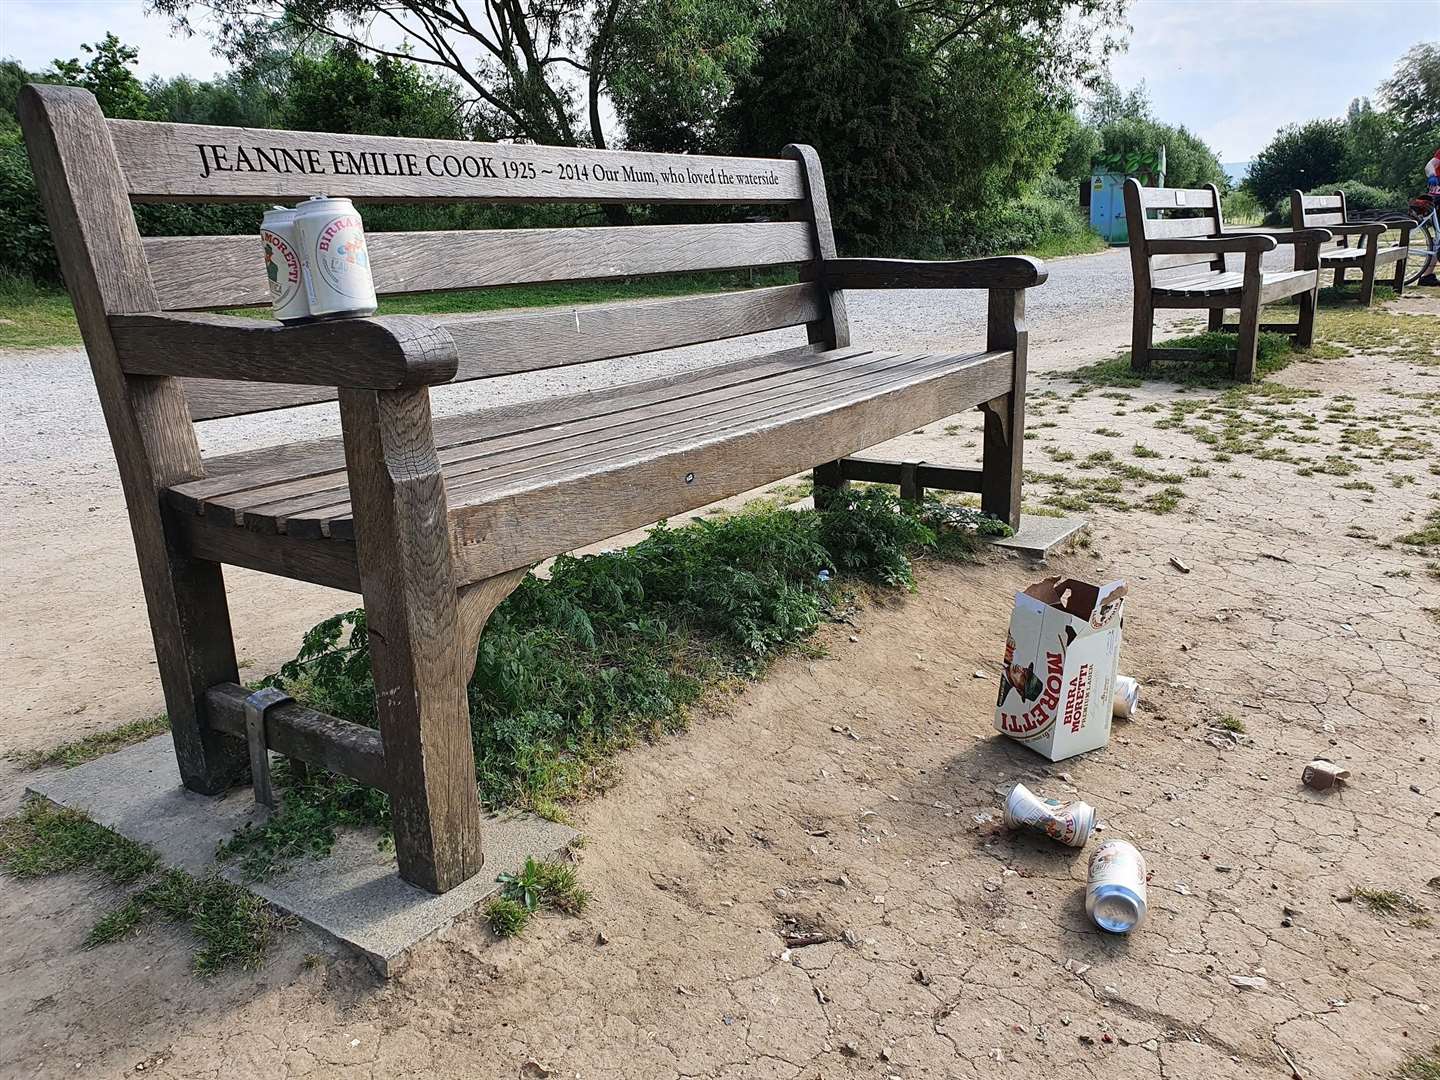 One visitors said the country park has become a tip. Picture: Tonbridge and Malling Borough Council